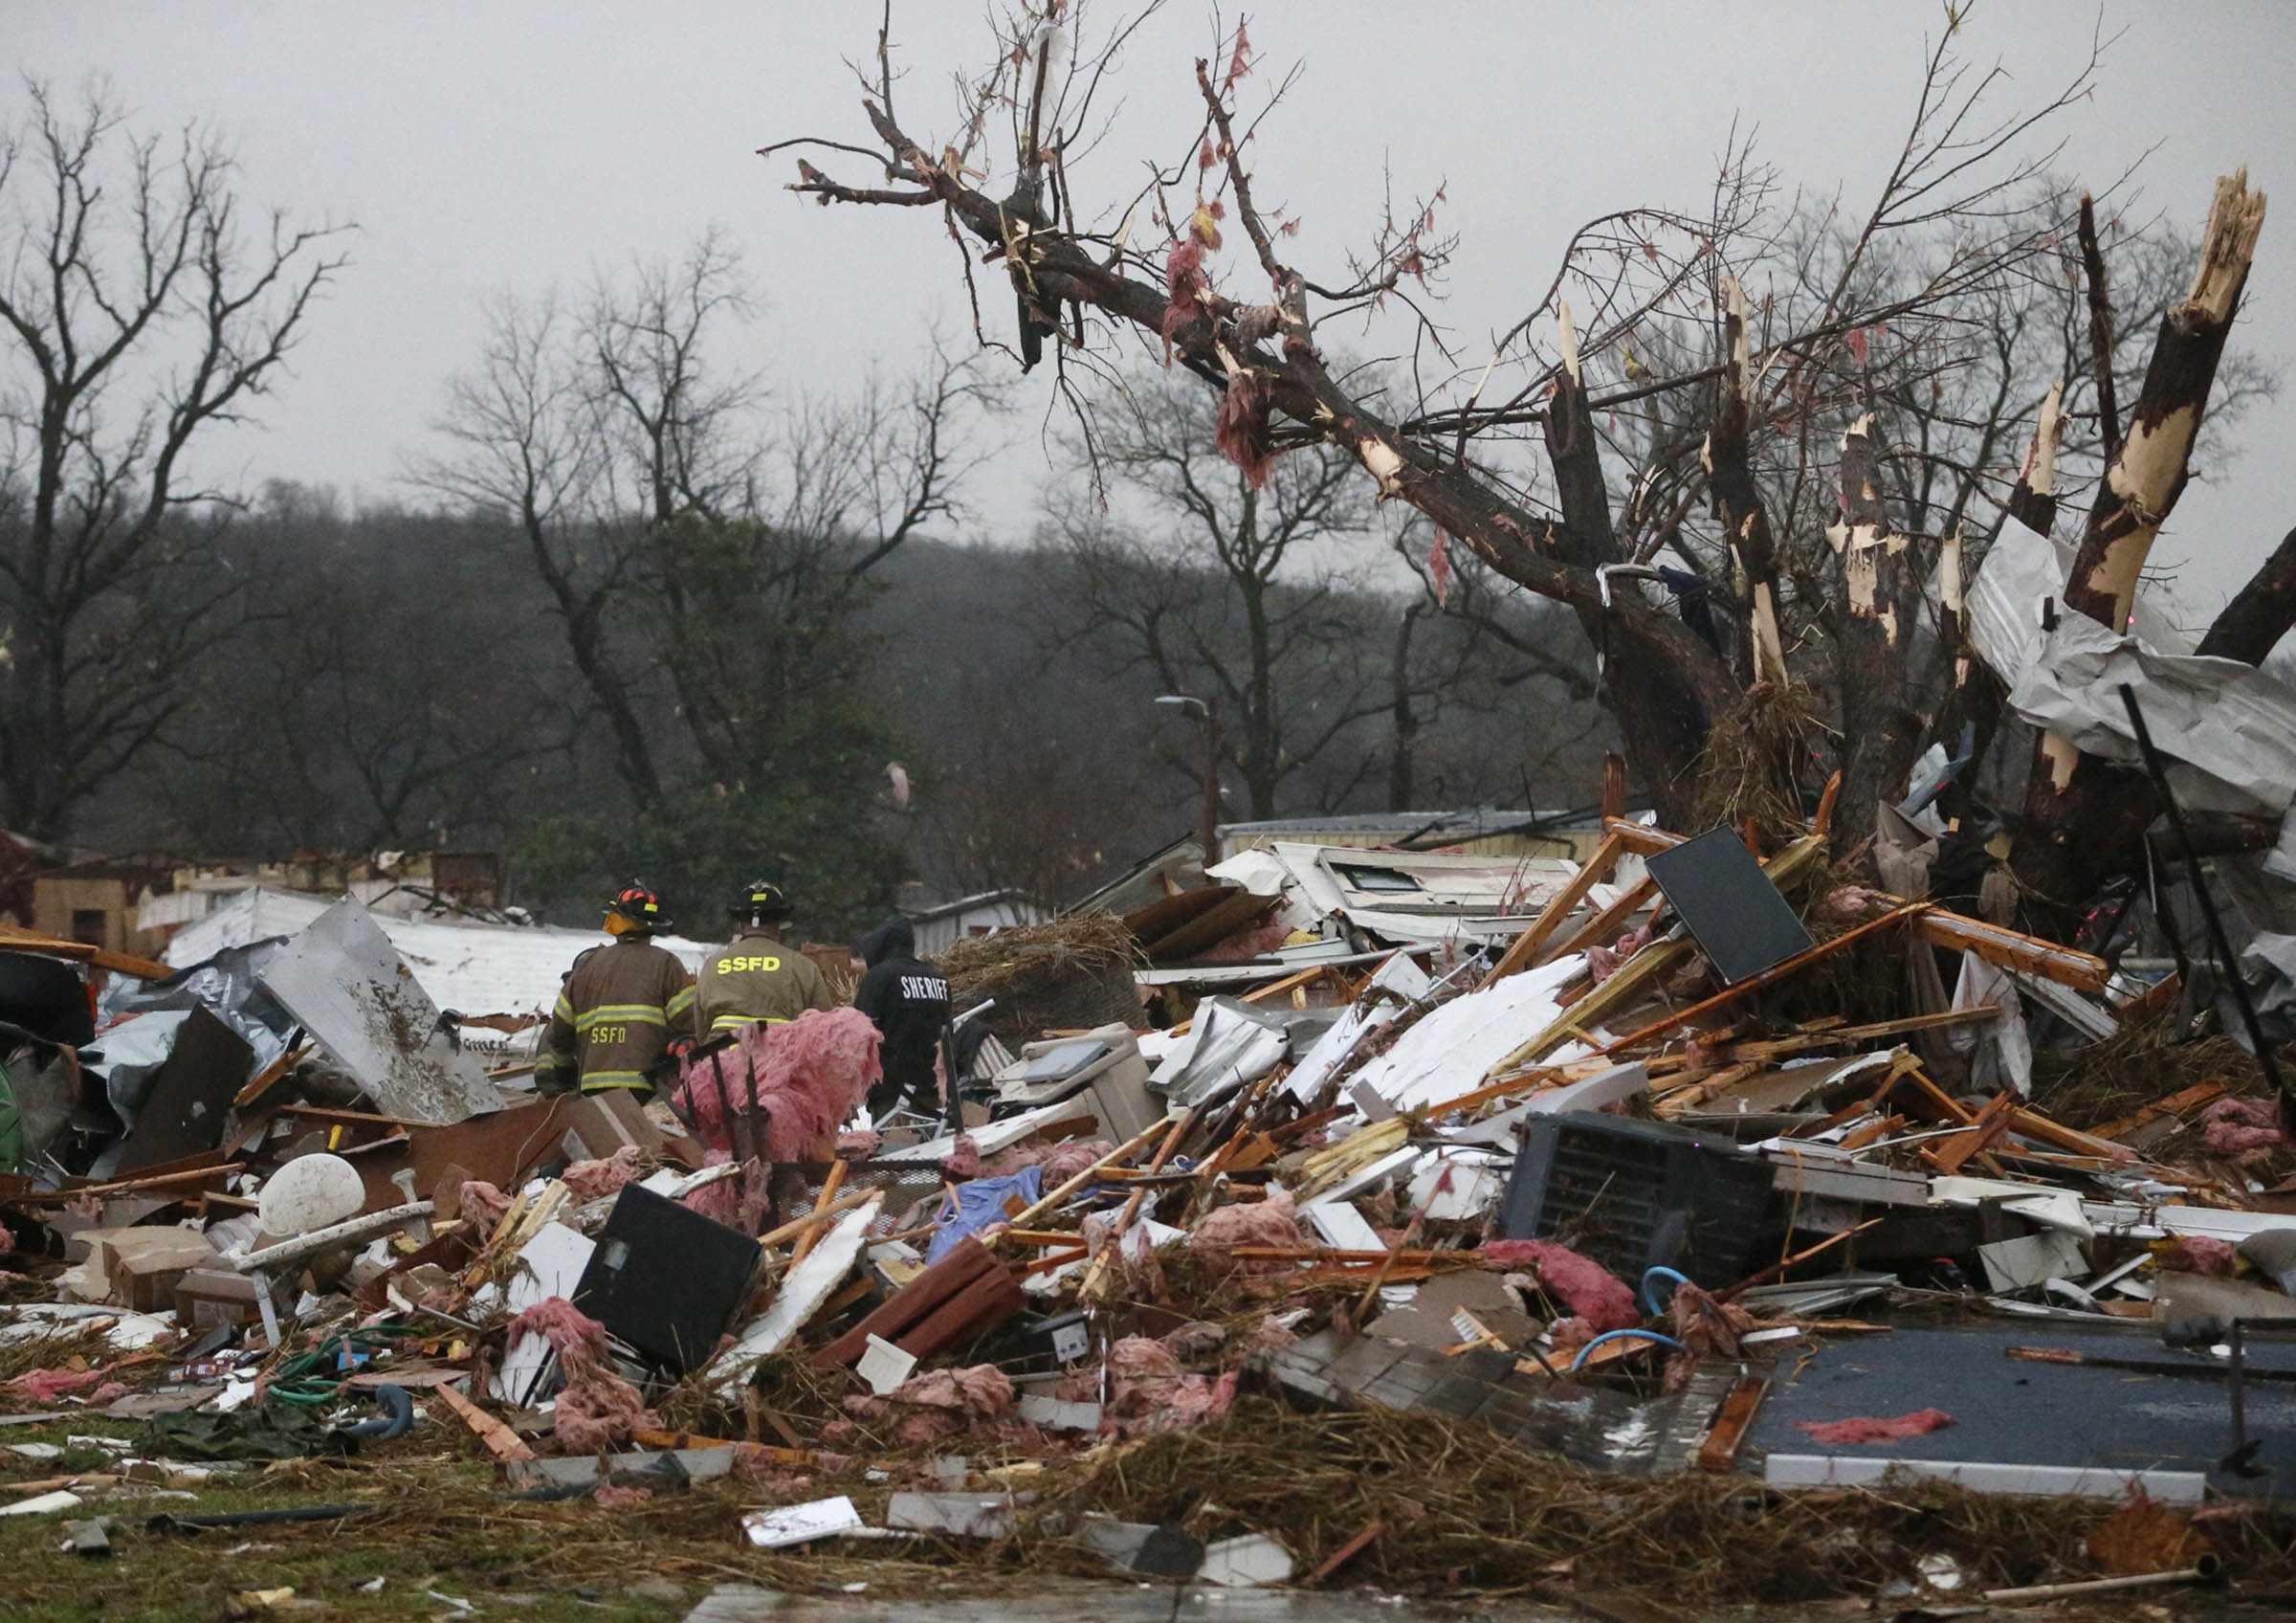 First responders work to free a man from a rubble pile after a round of severe weather hit a trailer park in Sand Springs, Okla., on March 25, 2015.